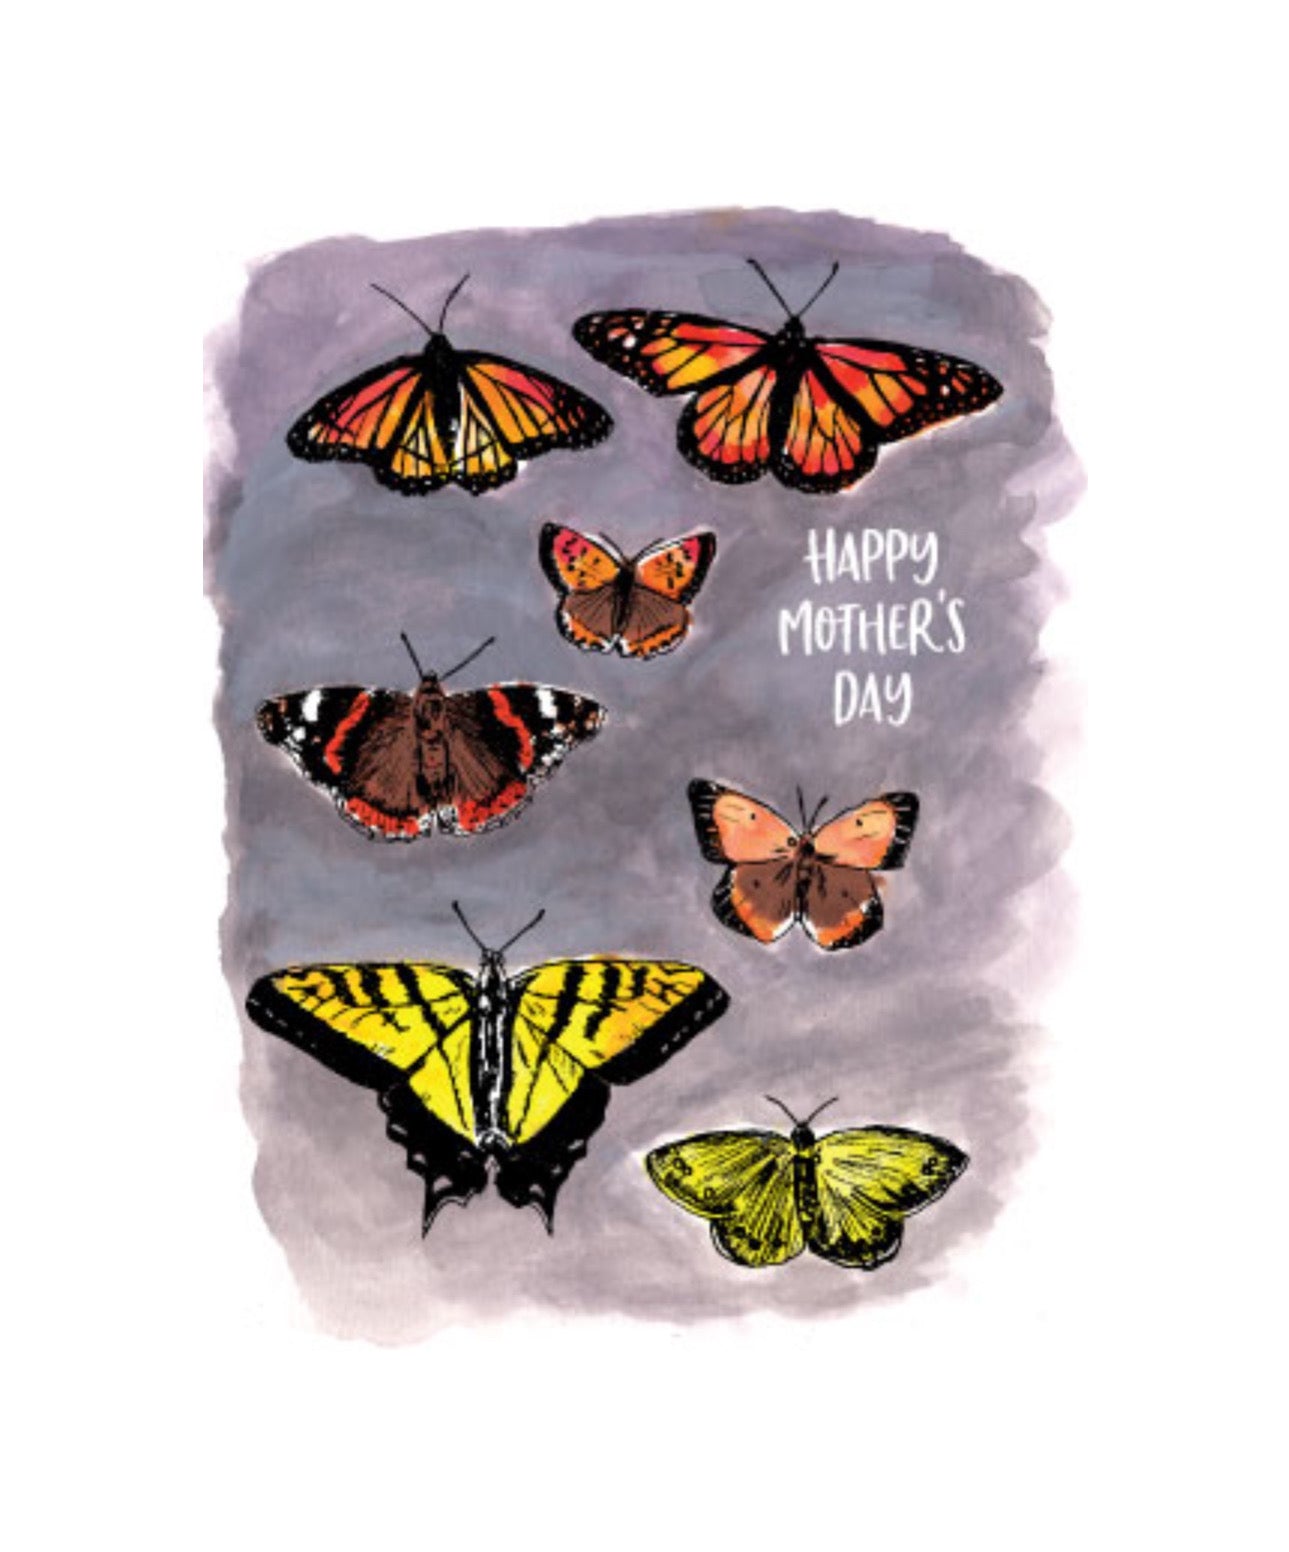 Happy Mother's Day Butterflies, letterpress printed card. Eco friendly